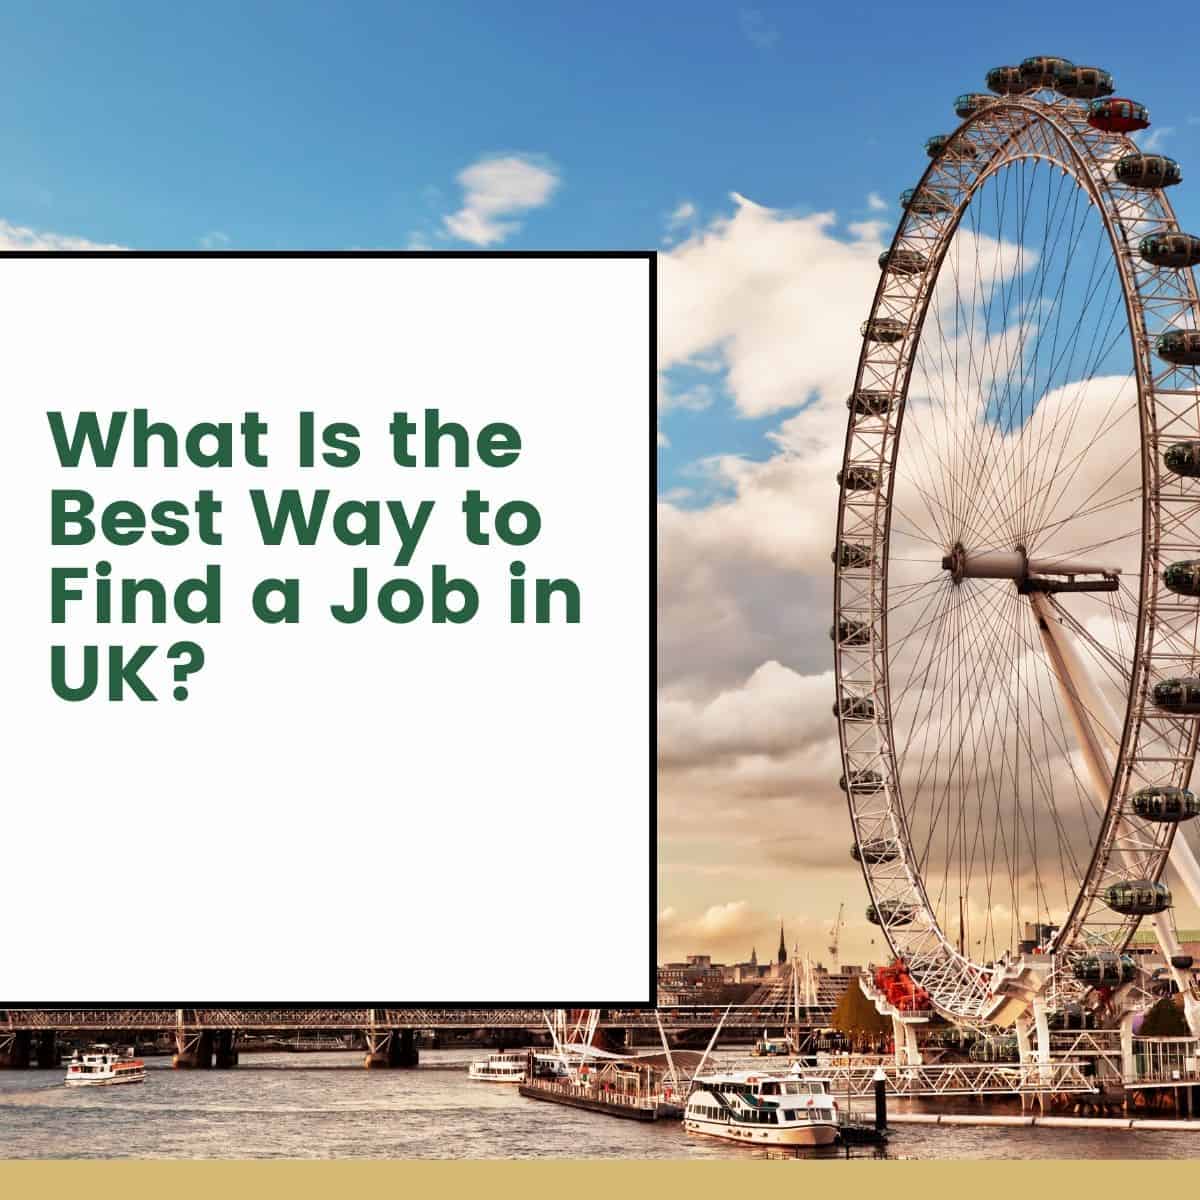 What Is the Best Way to Find a Job in The UK?